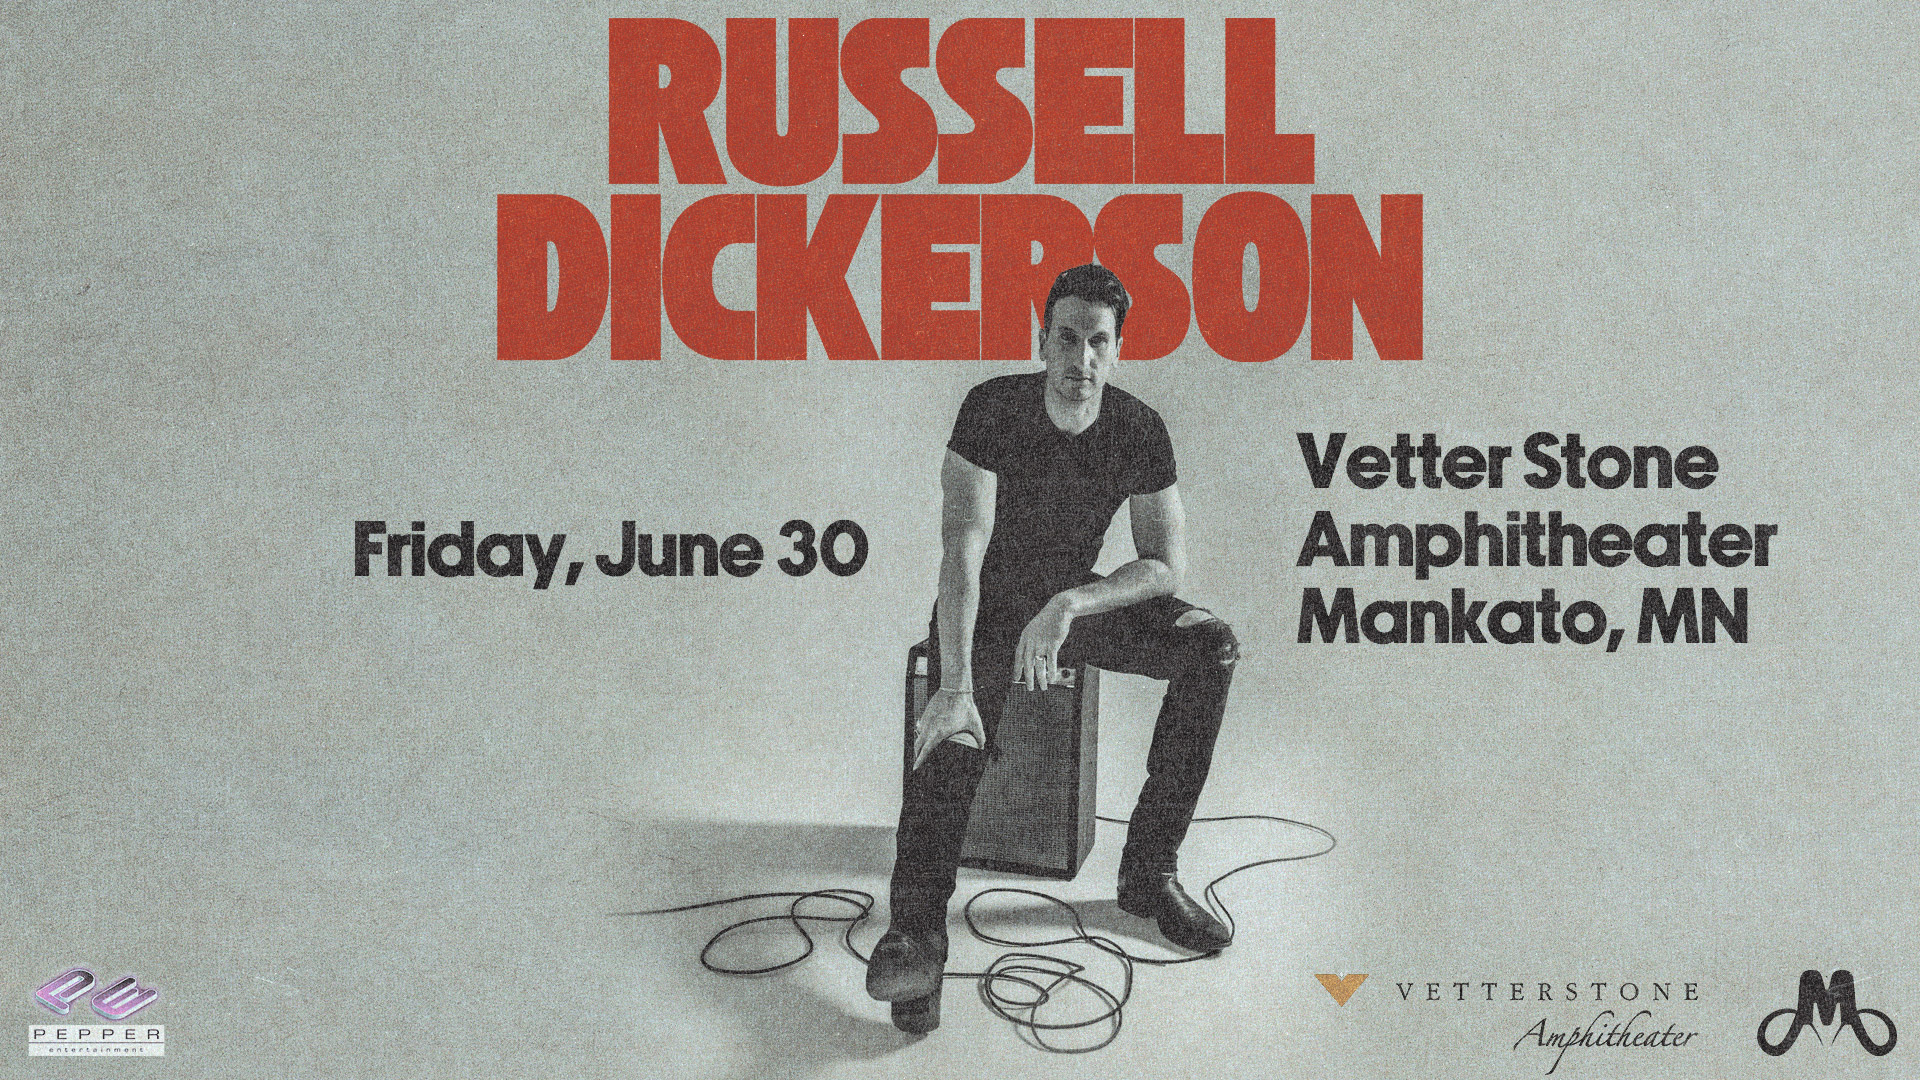 <h1 class="tribe-events-single-event-title">Russell Dickerson @ Vetter Stone Amphitheater</h1>